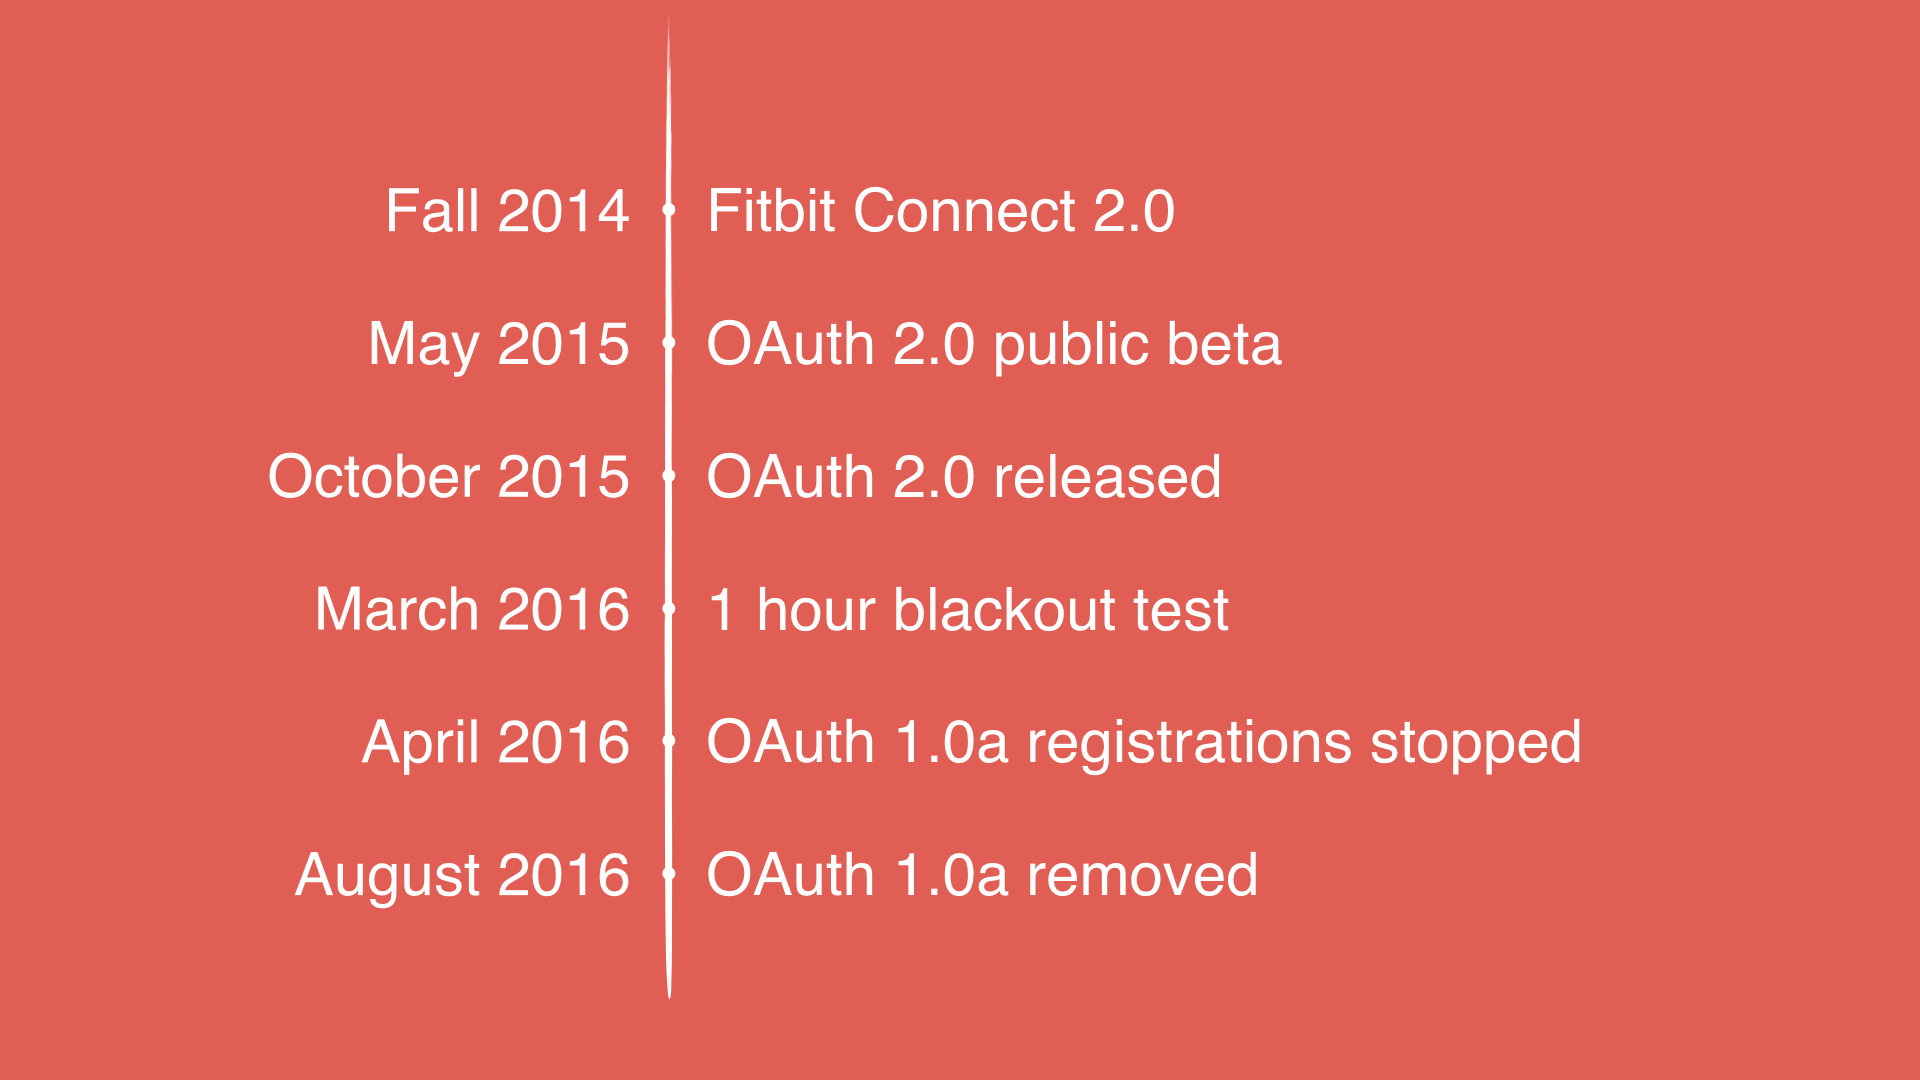 Timeline of events. Fall 2014: Fitbit Connect 2.0. May 2015: OAuth 2.0 public beta. October 2015: OAuth 2.0 released. March 2016: 1 hour blackout test. April 2016: OAuth 1.0a registrations stopped. August 2016: OAuth 1.0a removed.